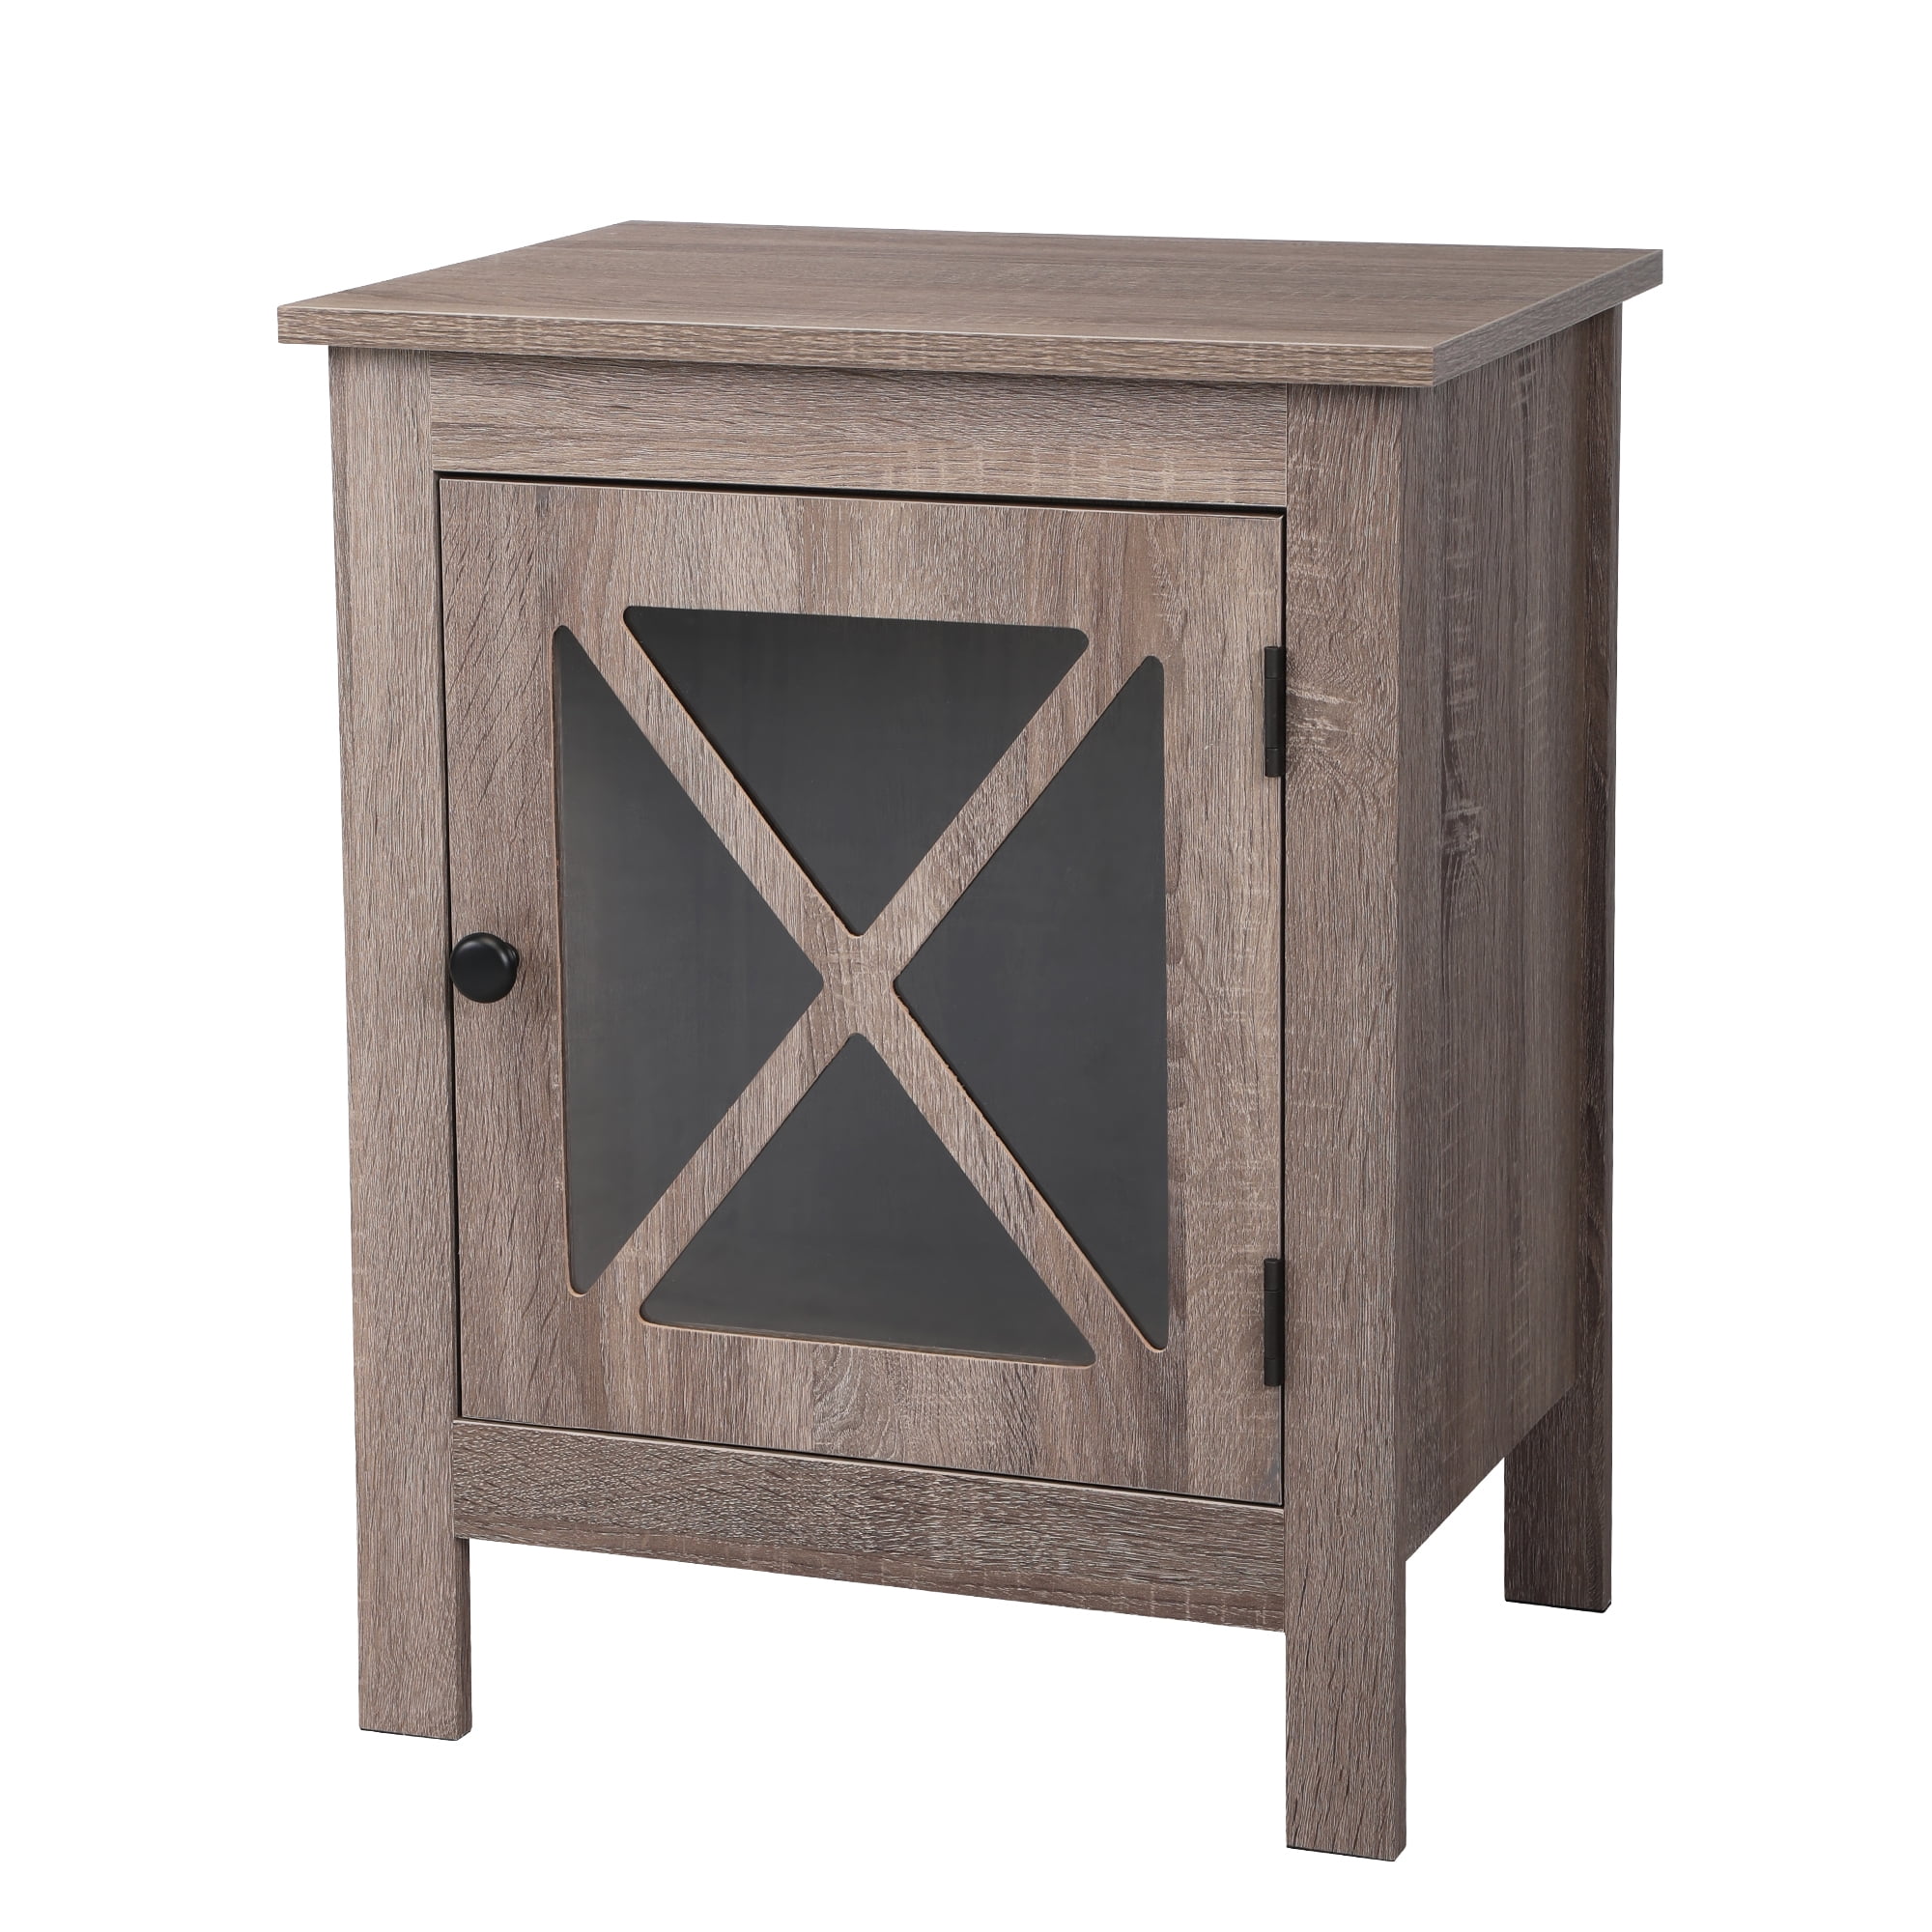 3 Tier X-side End Table/Cabinet Storage with 6 Baskets  in Walnut 